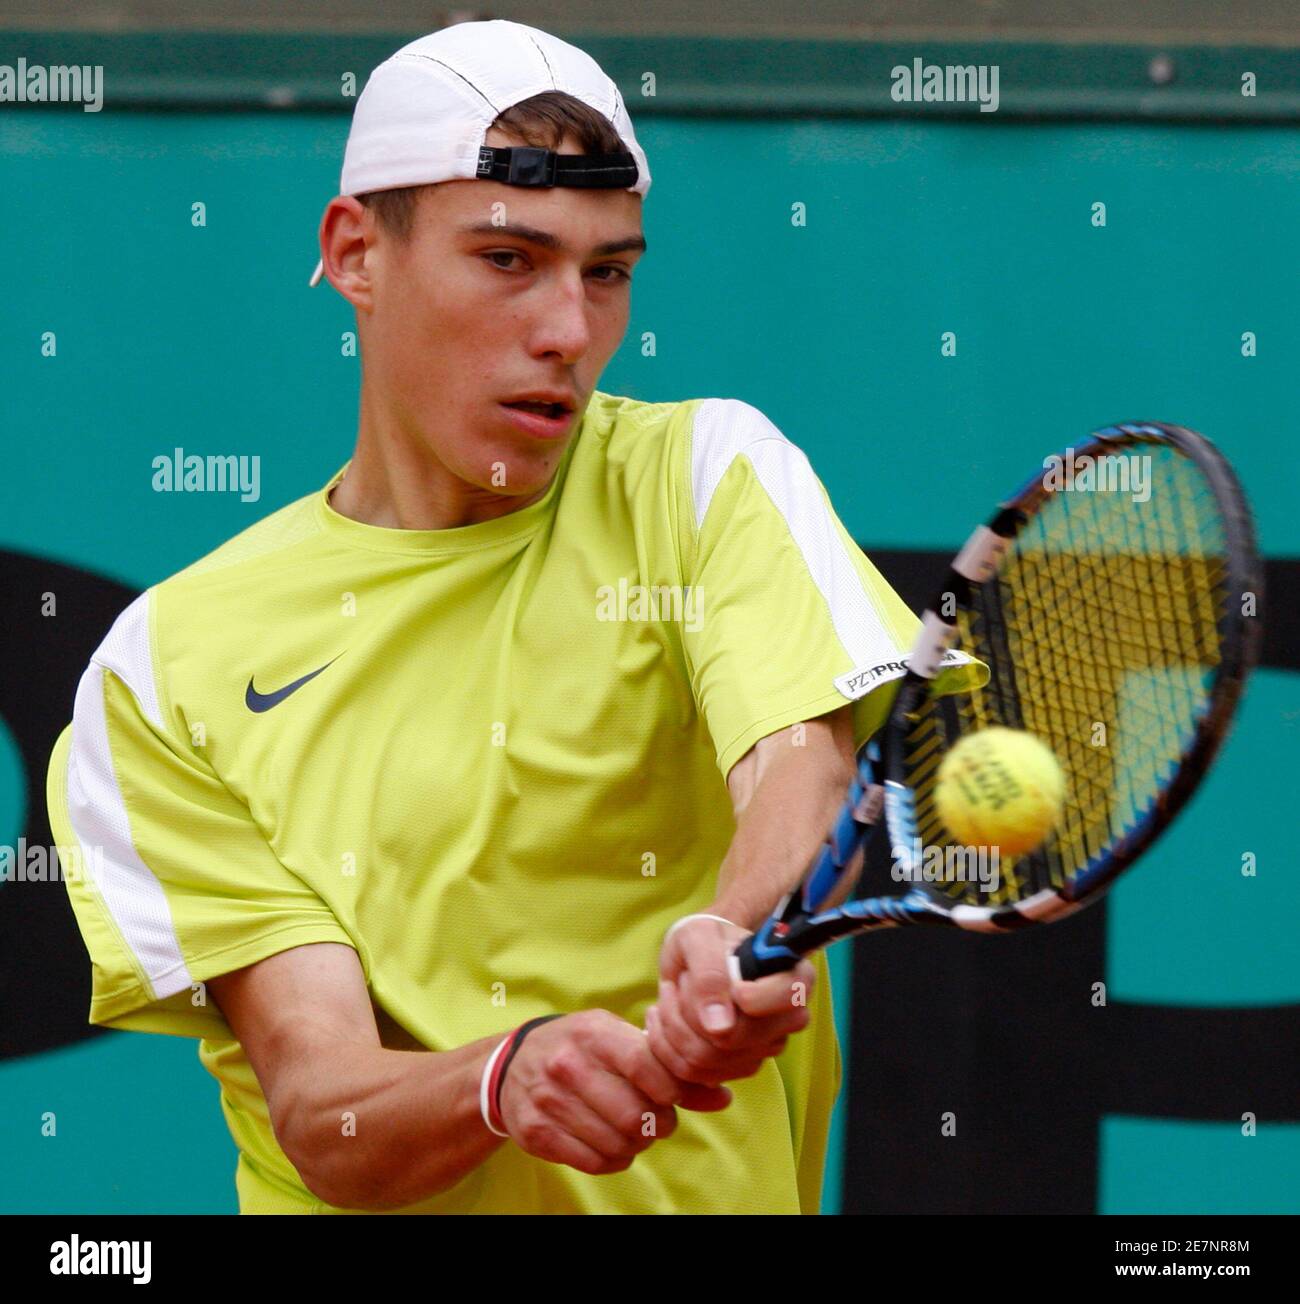 Poland S Jerzy Janowicz Returns The Ball To Taiwan S Tsung Hua Yang During The Boys Junior S Final At The French Open Tennis Tournament At Roland Garros In Paris June 8 08 Reuters Regis Duvignau France